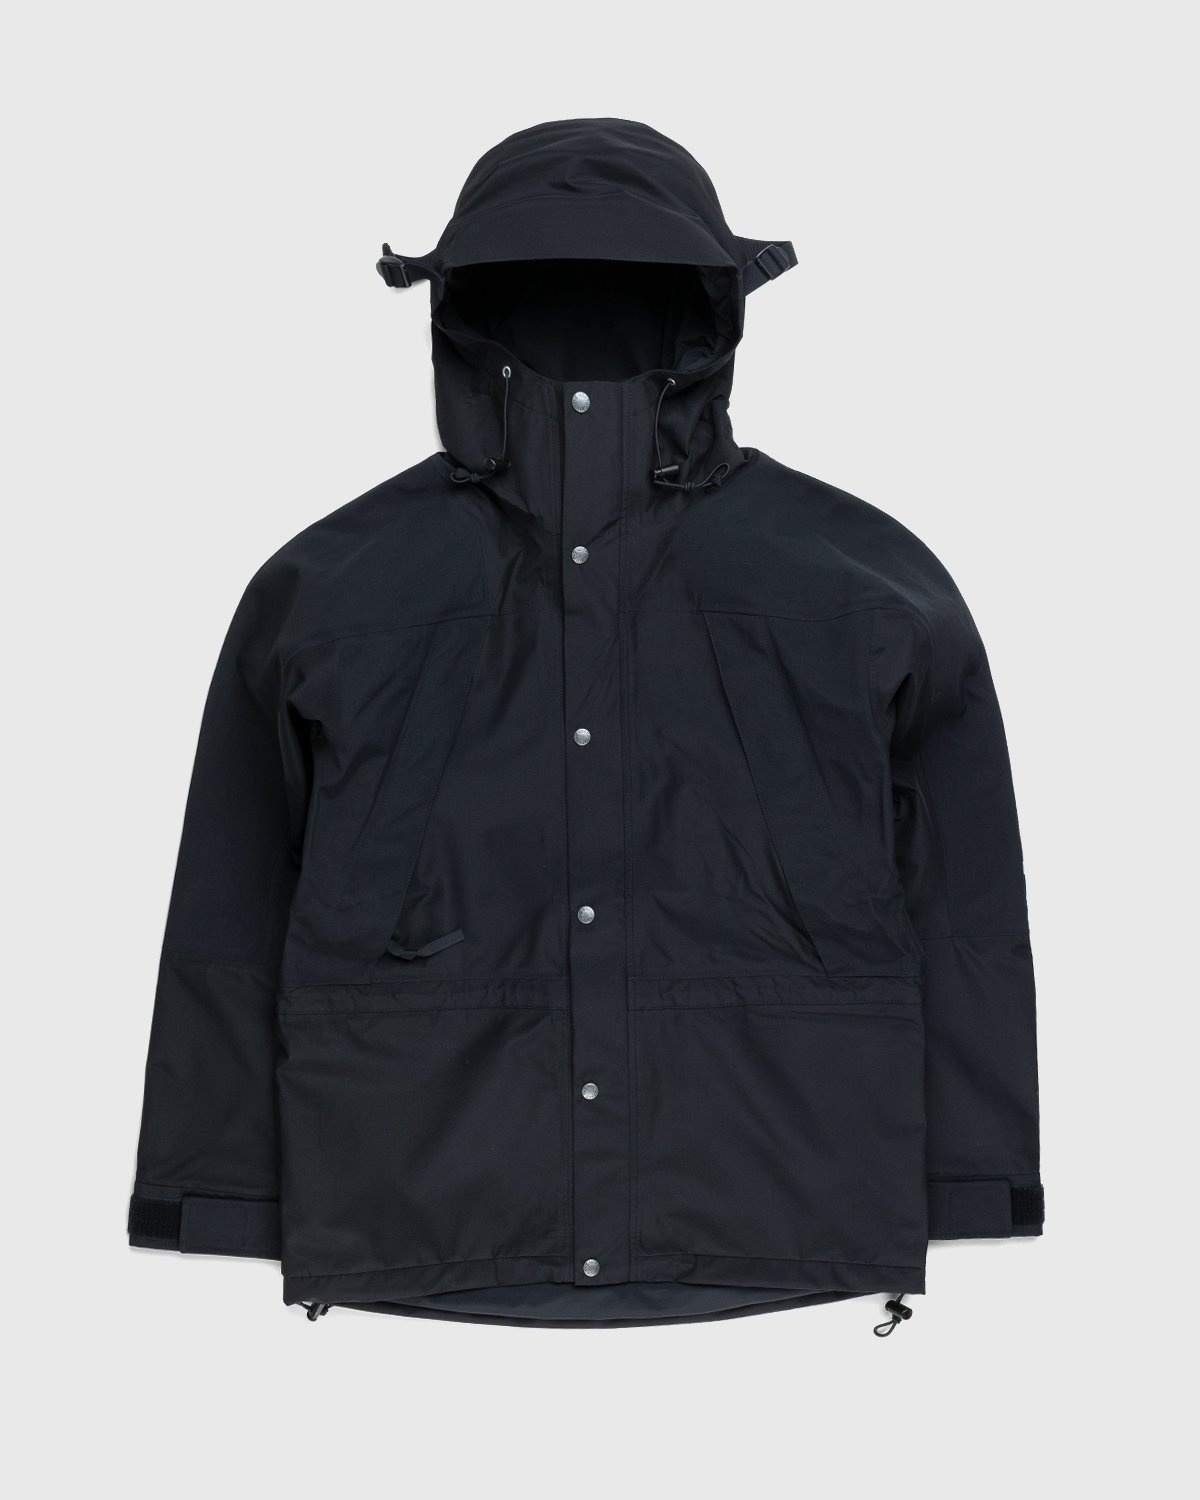 The North Face – 1994 Retro Mountain Light Jacket Black - Outerwear - Black - Image 1